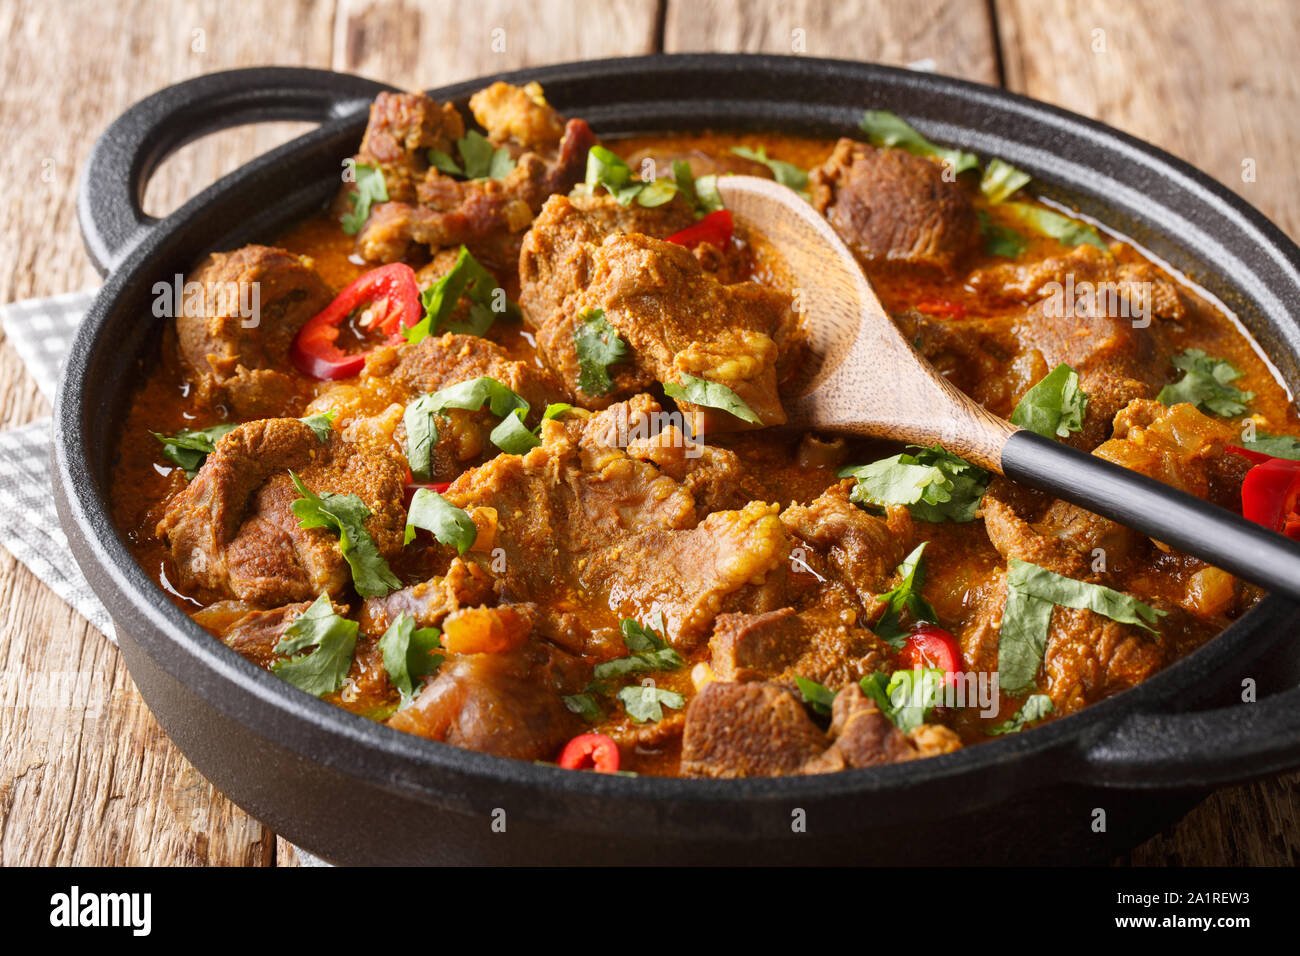 Kashmiri Lamb rogan josh with spices and gravy close-up in a pan on the table. horizontal Stock Photo